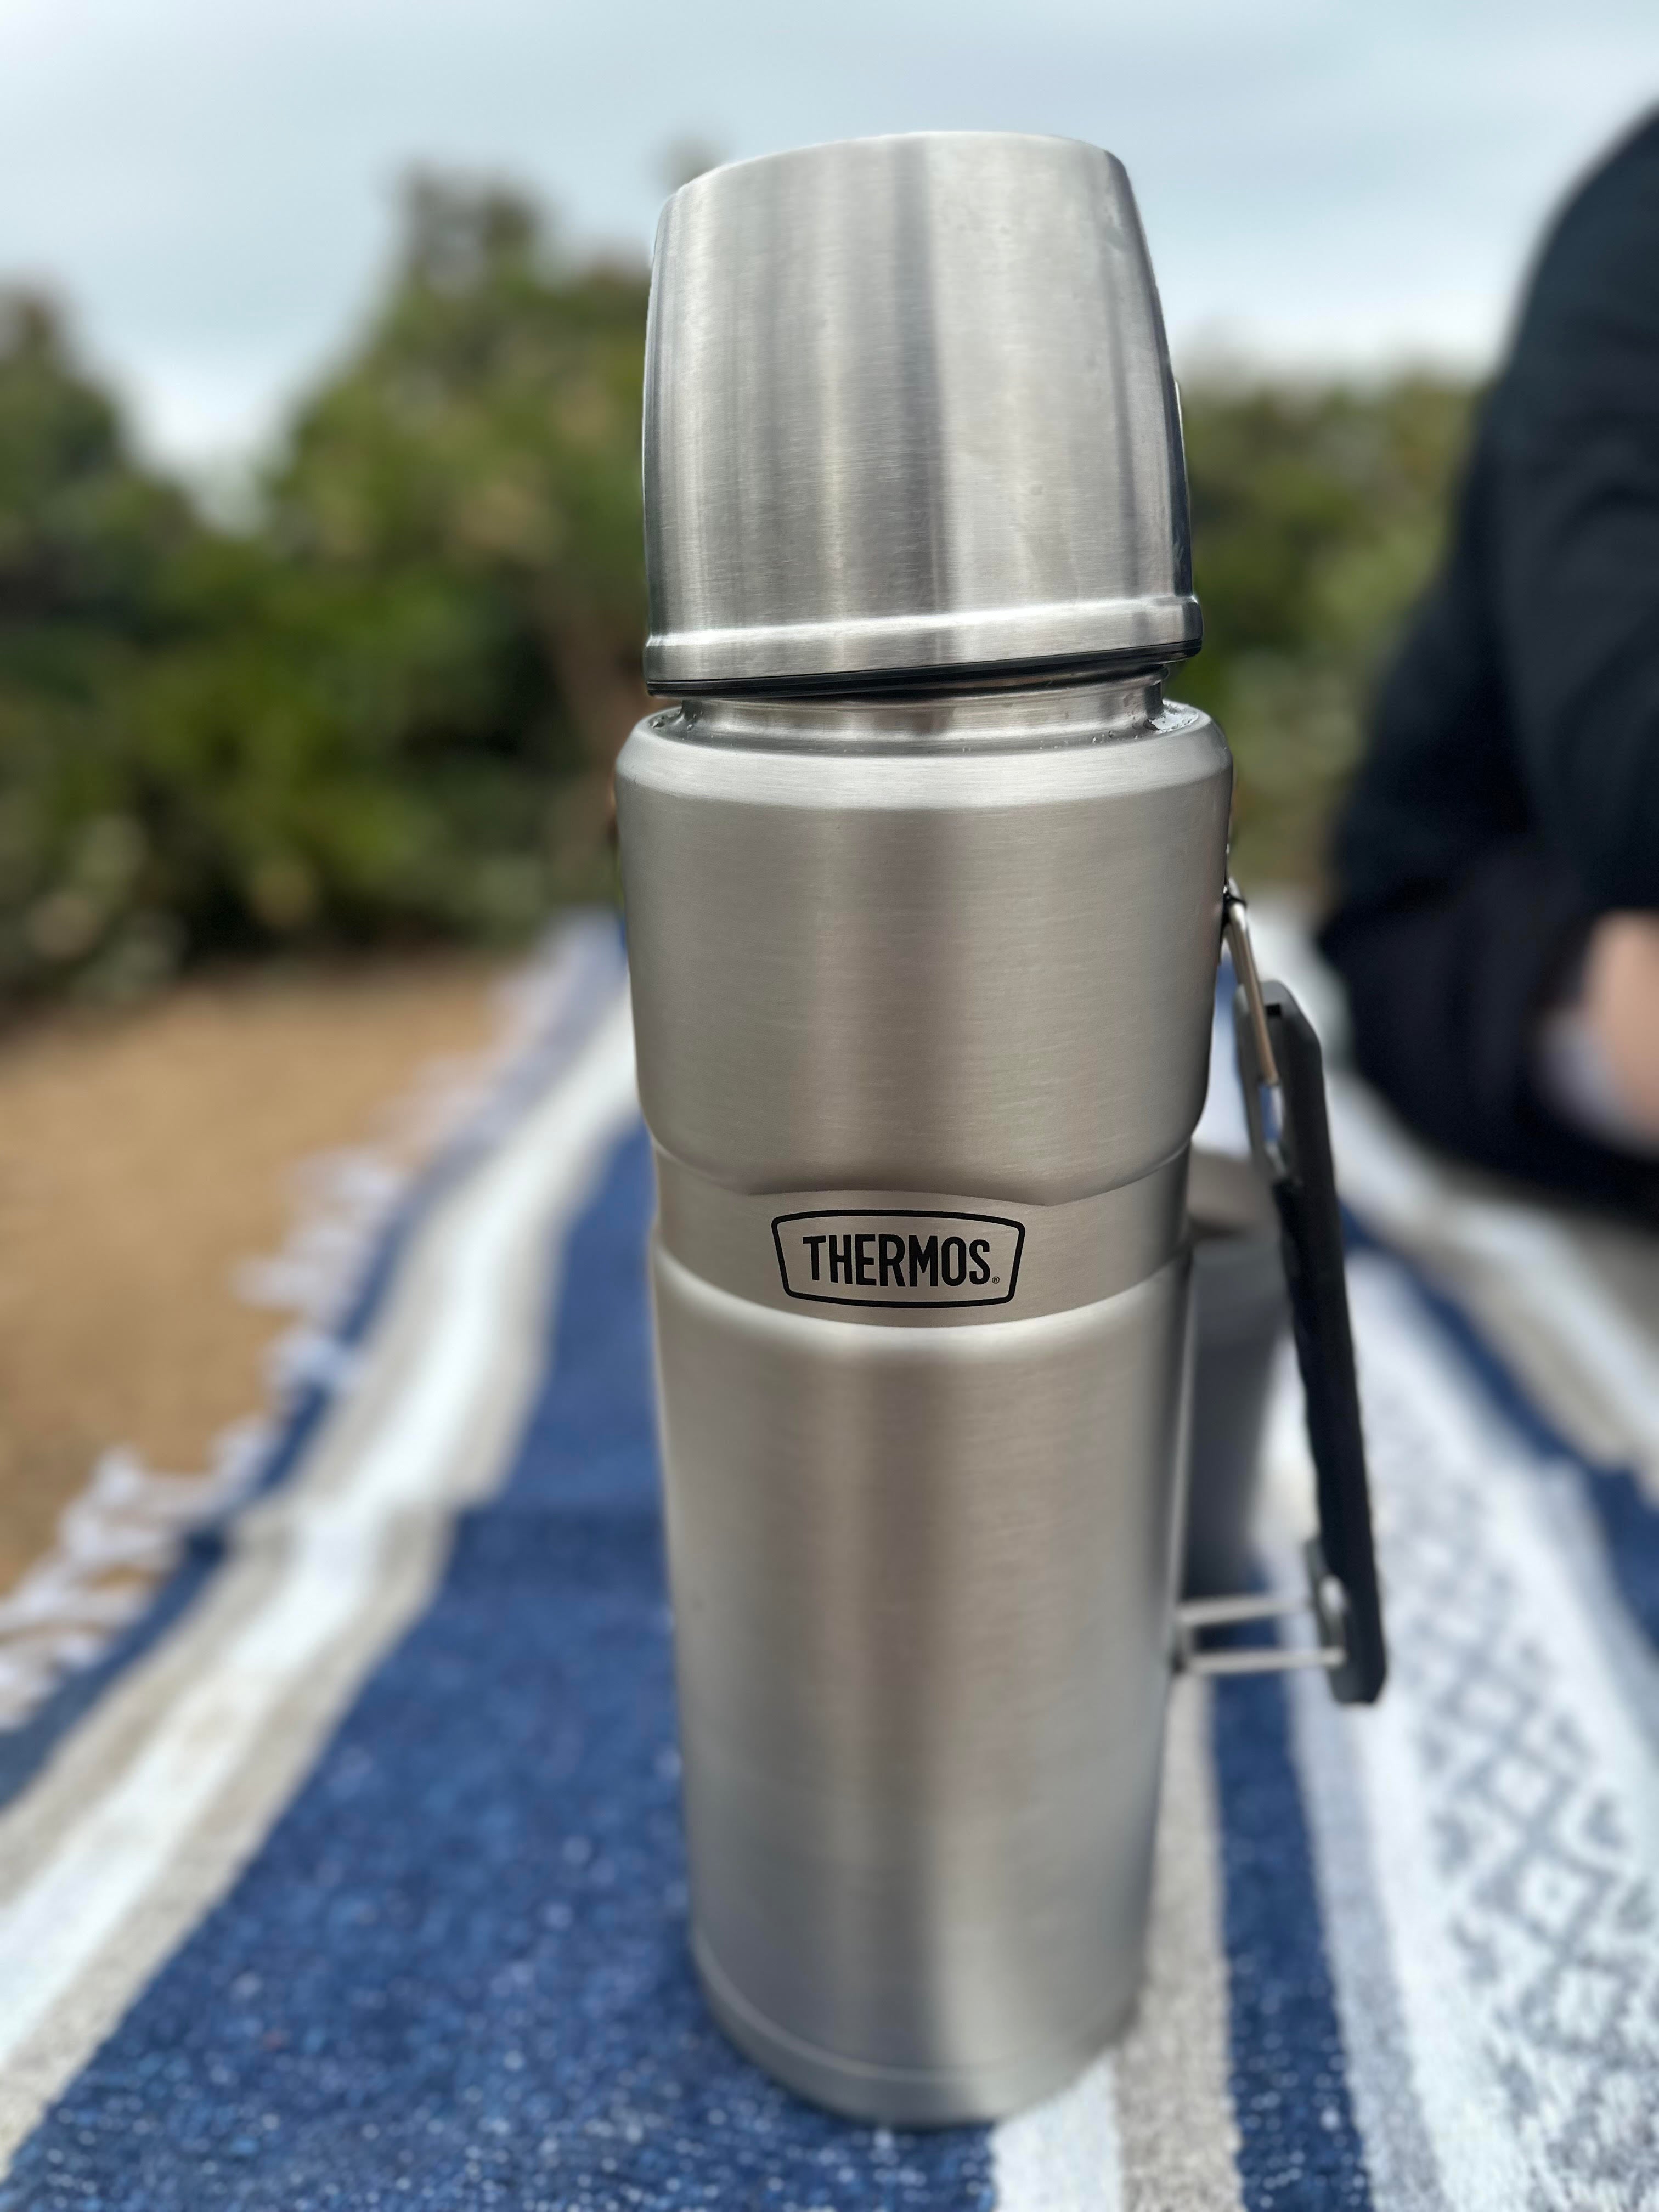 THERMOS Stainless King 2L Stainless Steel Beverage Bottle